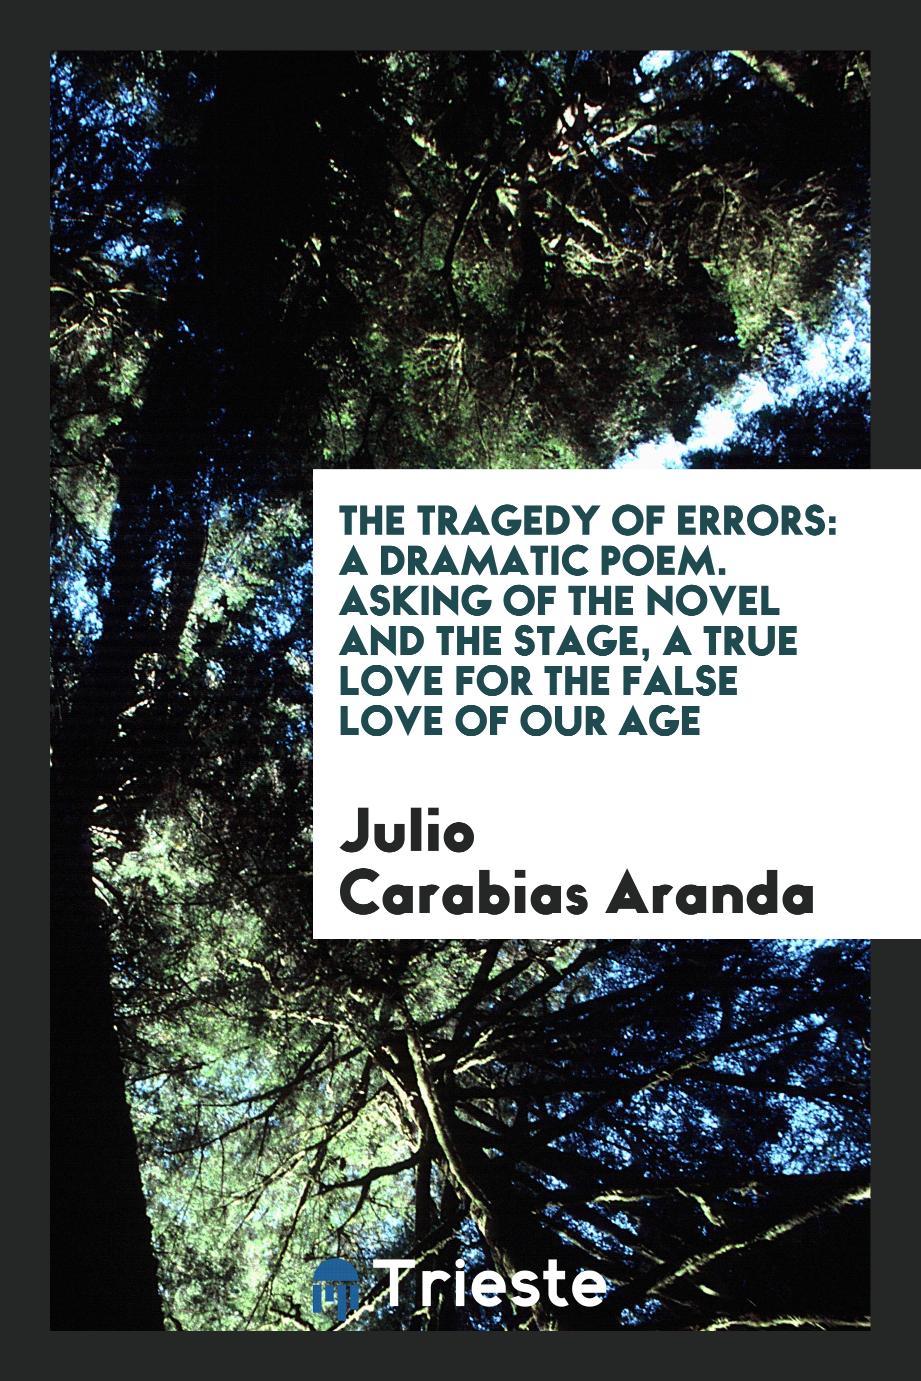 The Tragedy of Errors: A Dramatic Poem. Asking of the Novel and the Stage, a True Love for the False Love of Our Age